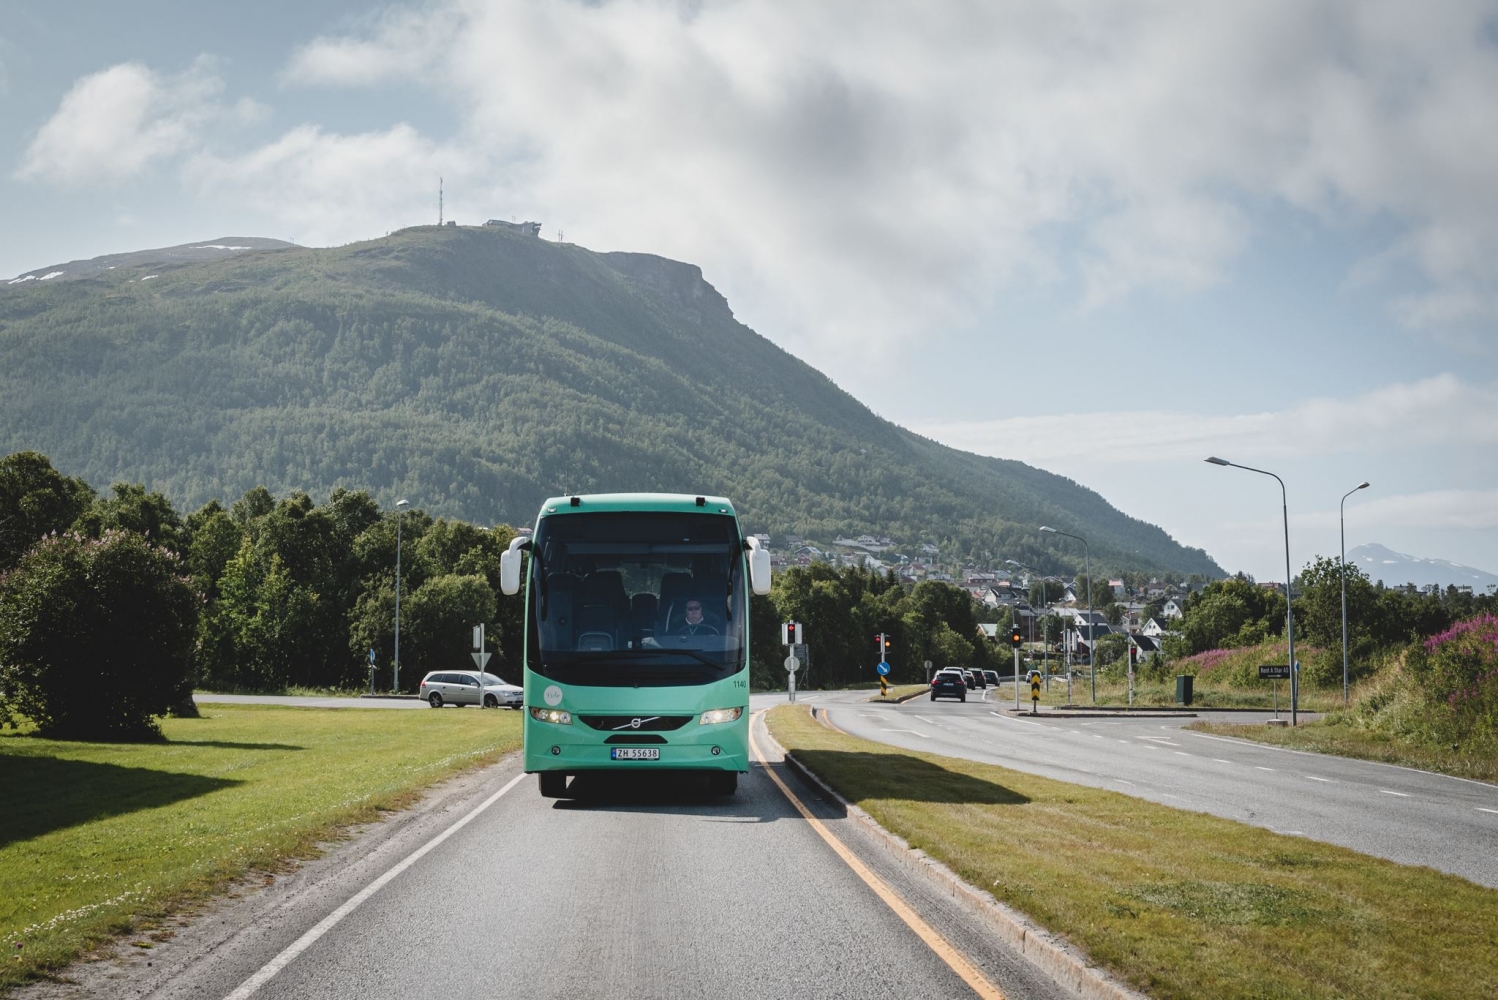 Bus on the road, mountain in the background